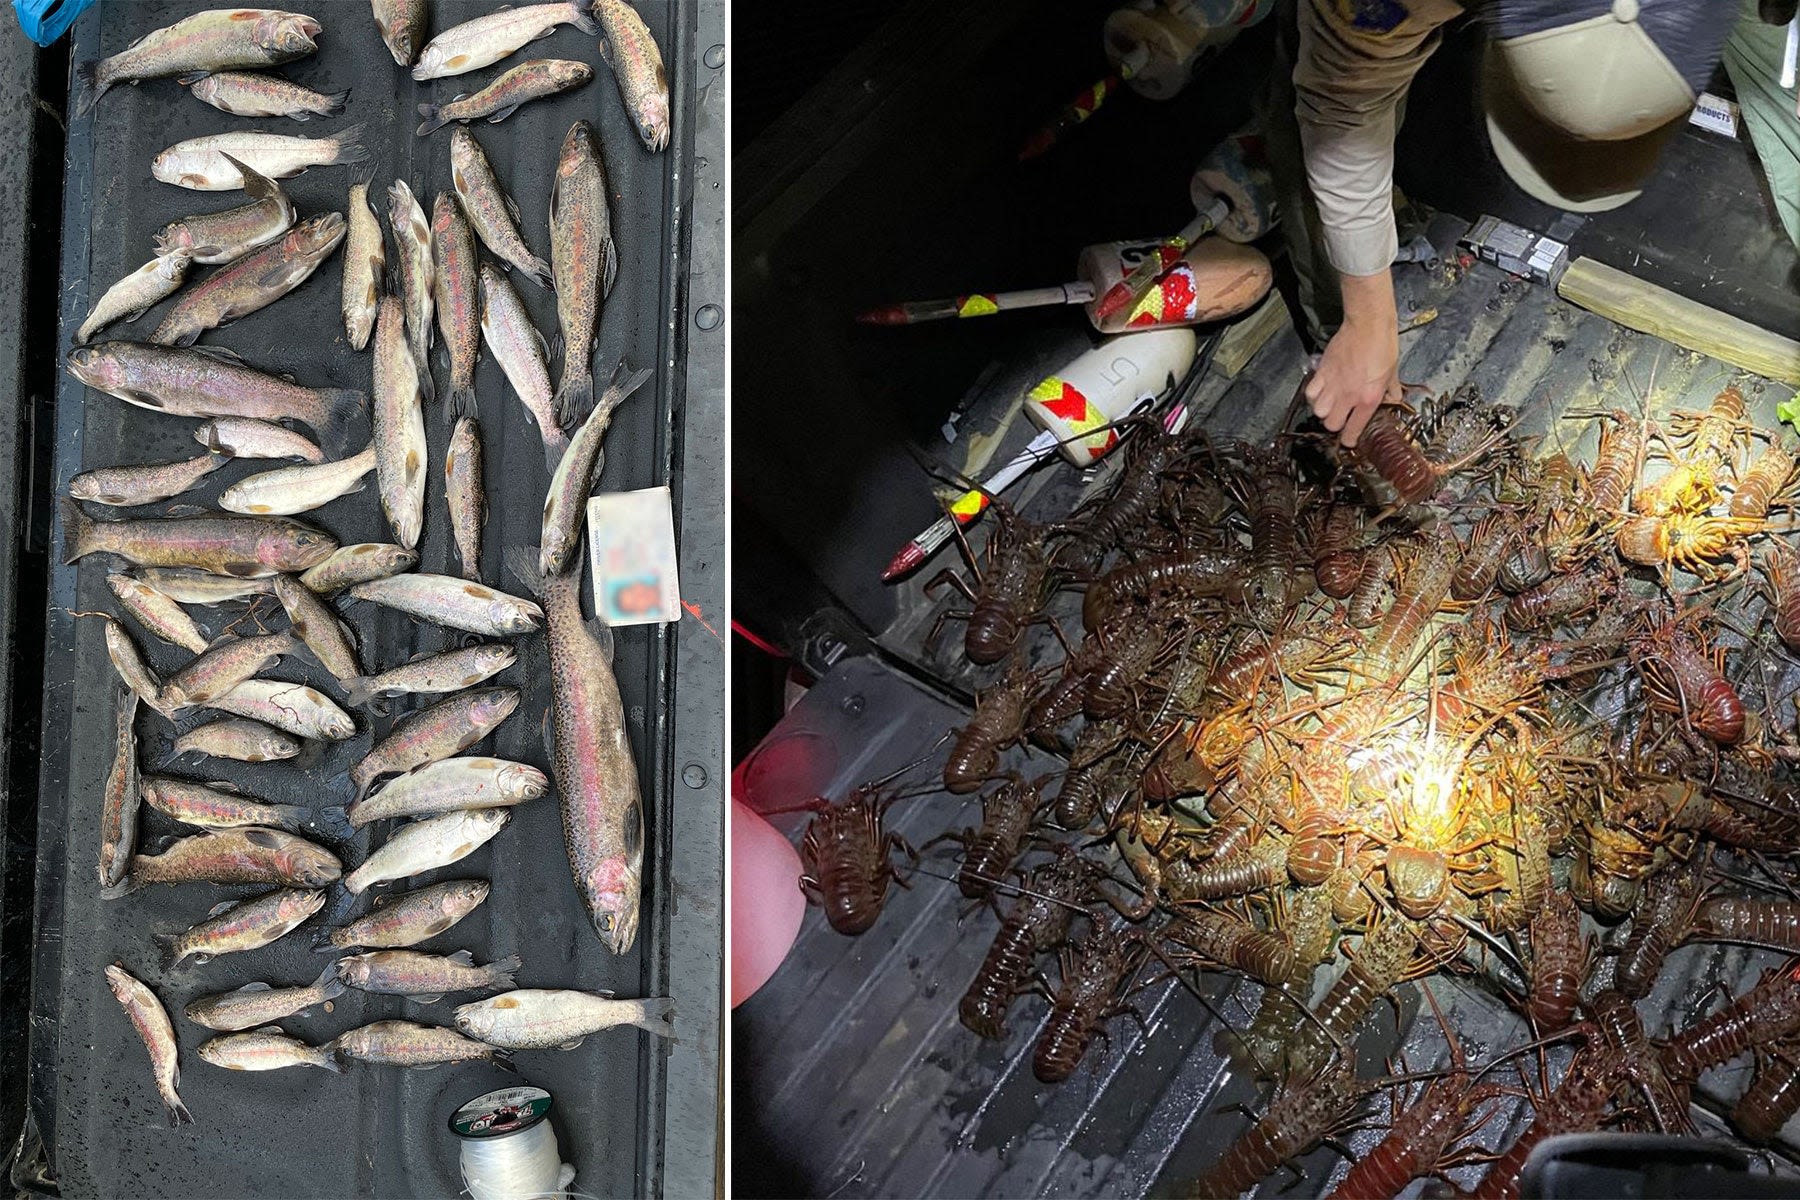 Wardens Seize 49 Protected Trout and 86 Spiny Lobsters from Poachers in Southern California